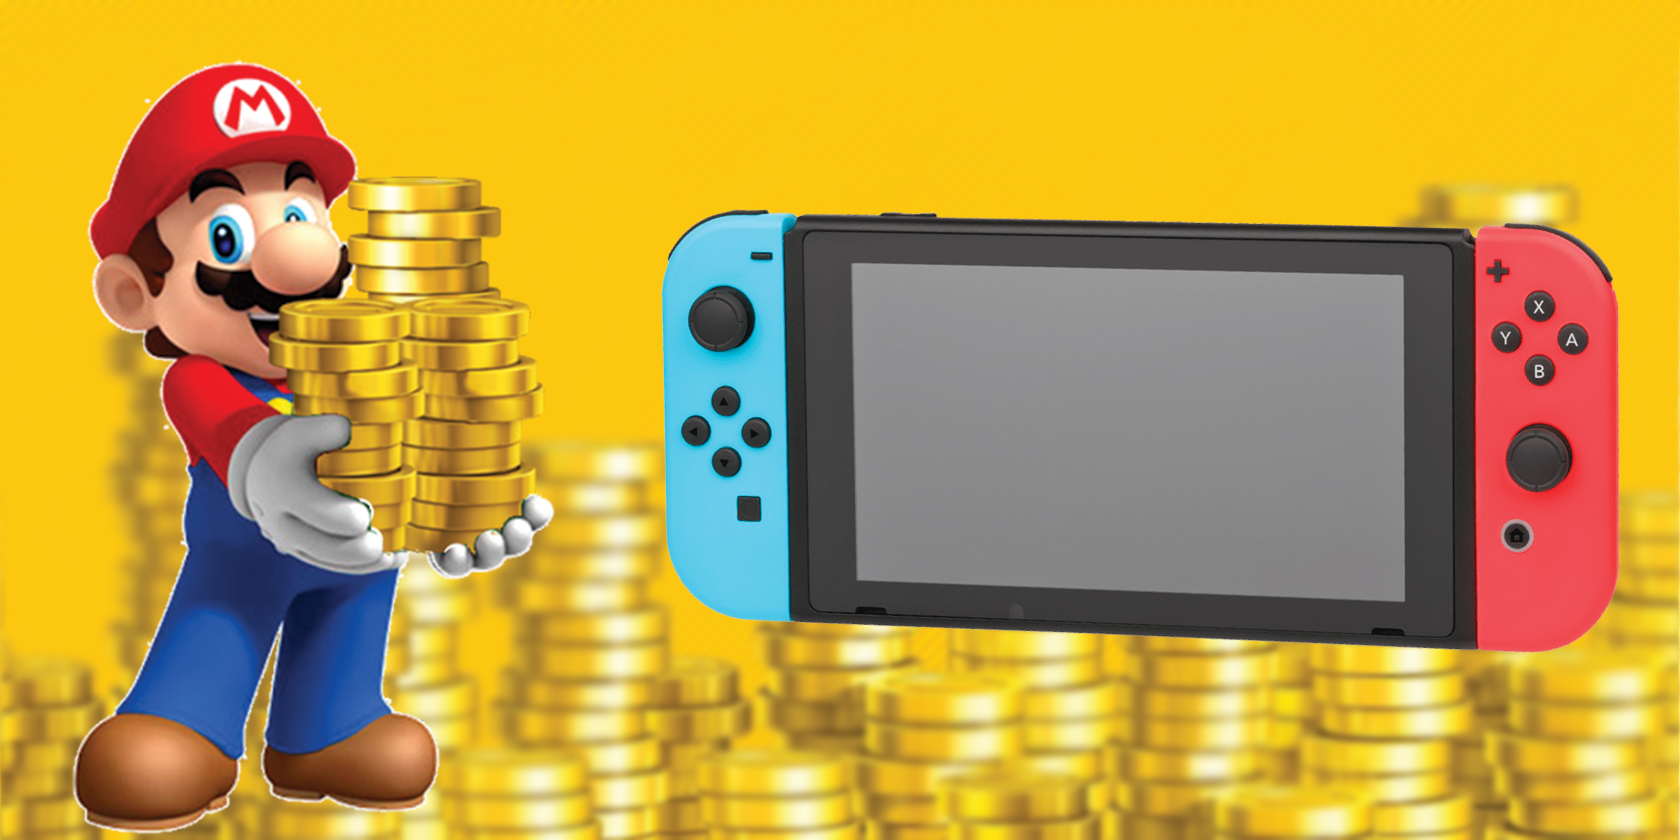 mario with coins standing next to a switch console